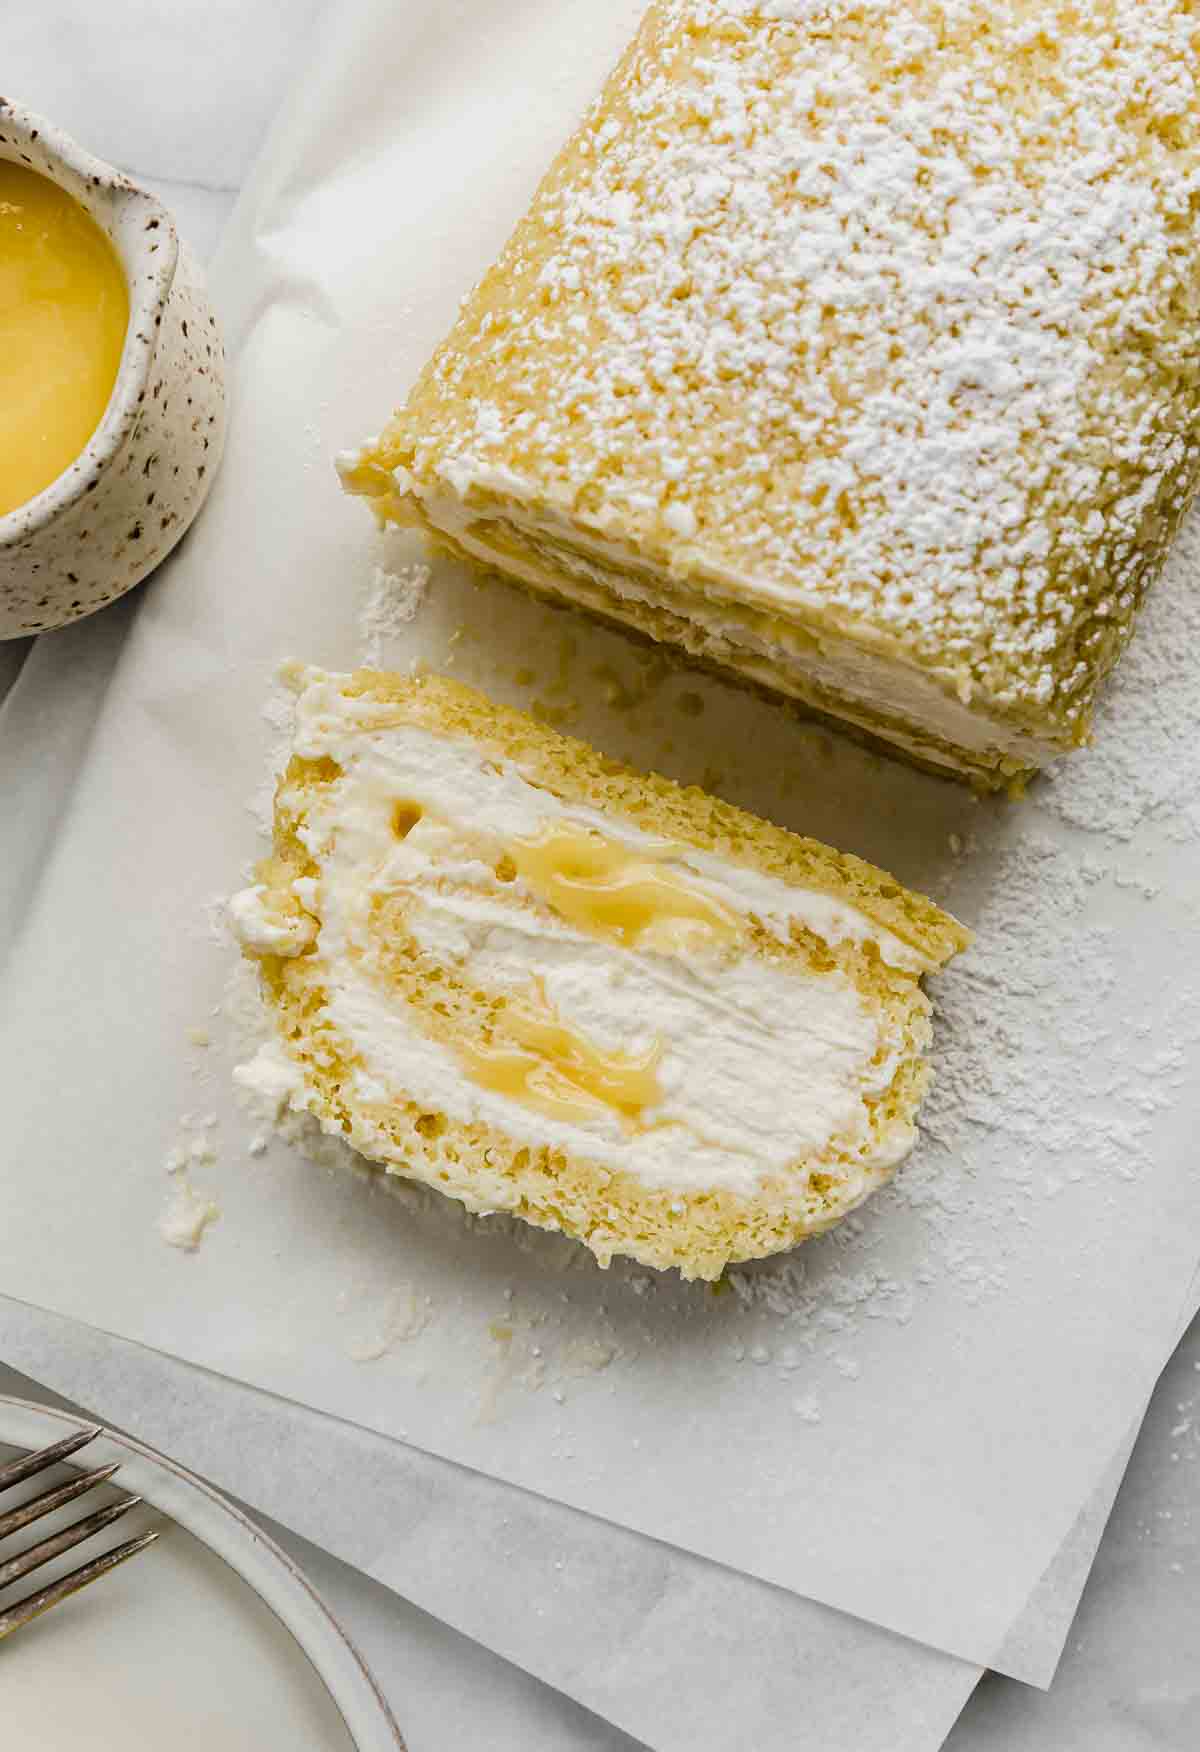 A slice of Lemon Swiss Roll filled with mascarpone cream and lemon curd, on a white parchment paper.